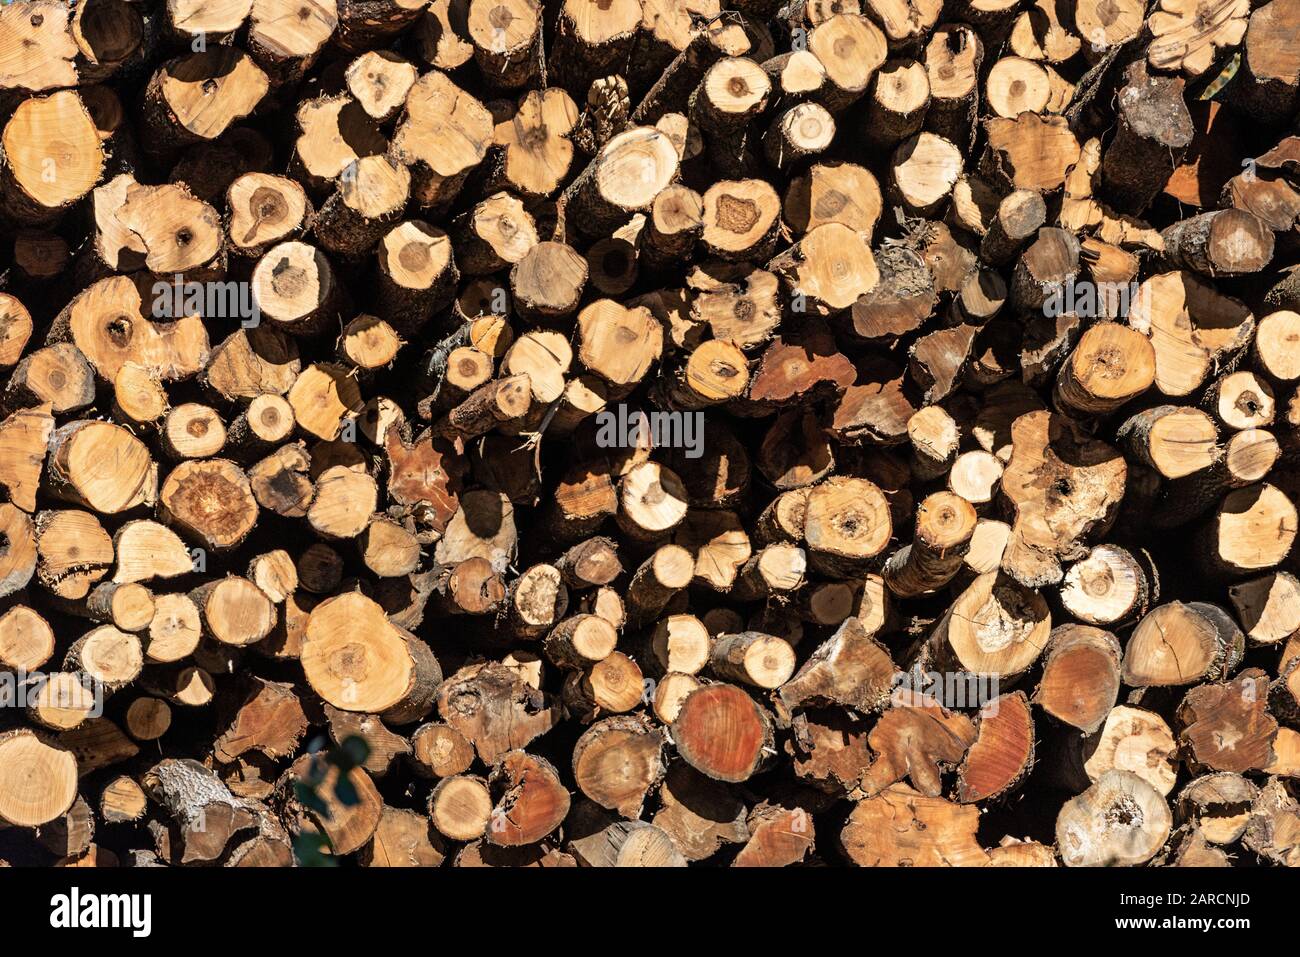 Pile of freshly cut raw timber. Stock Photo